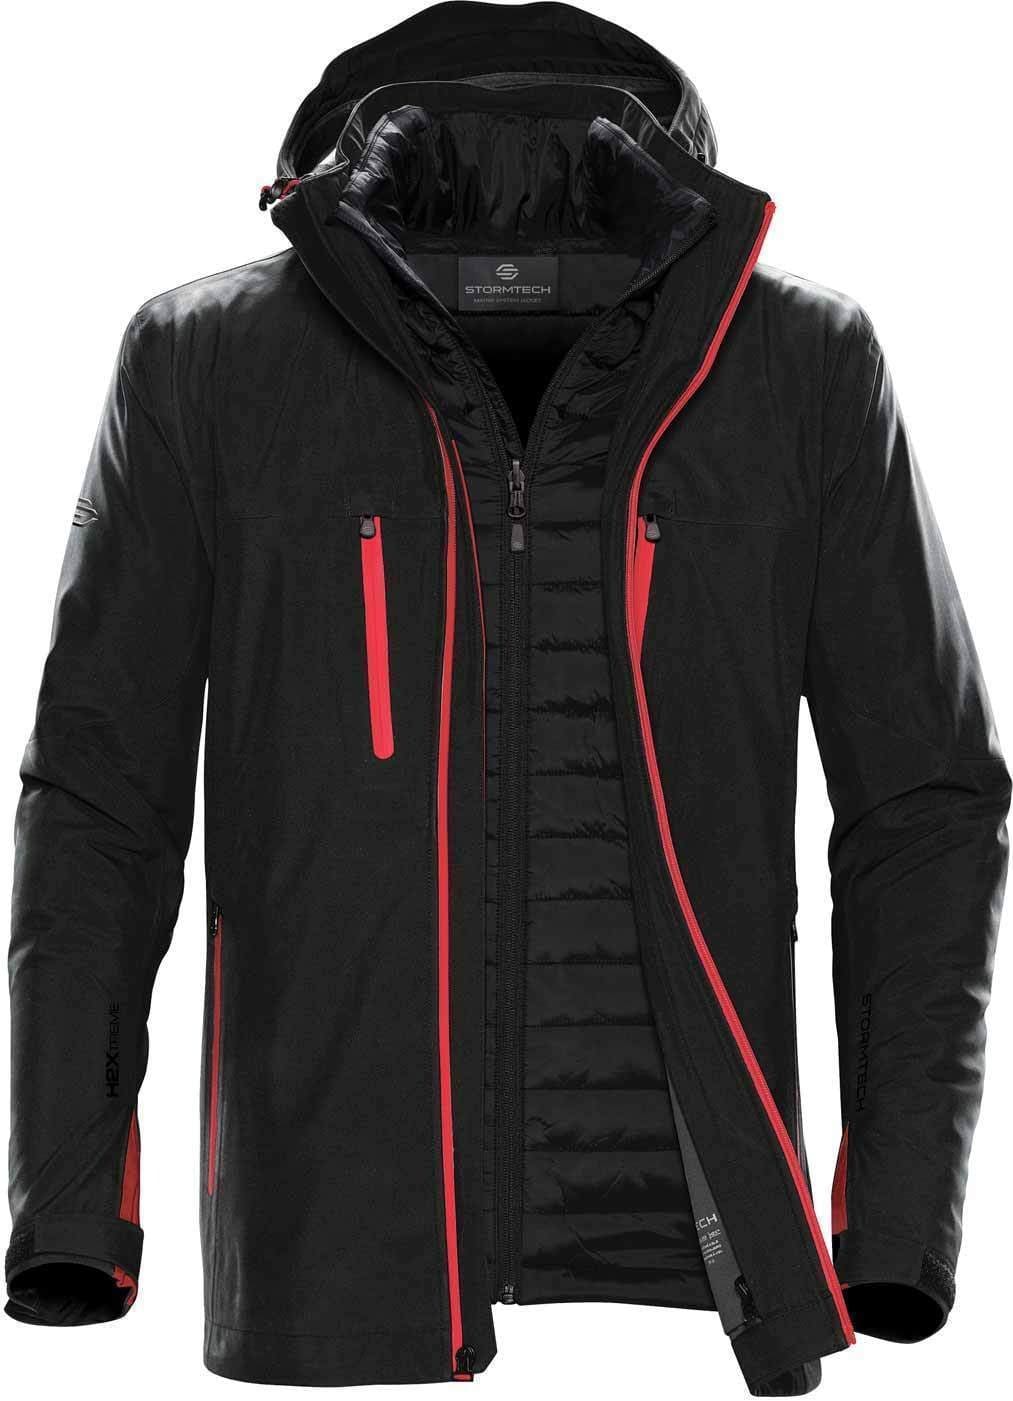 Stormtech Men's Matrix System Jacket for embroidery or screen